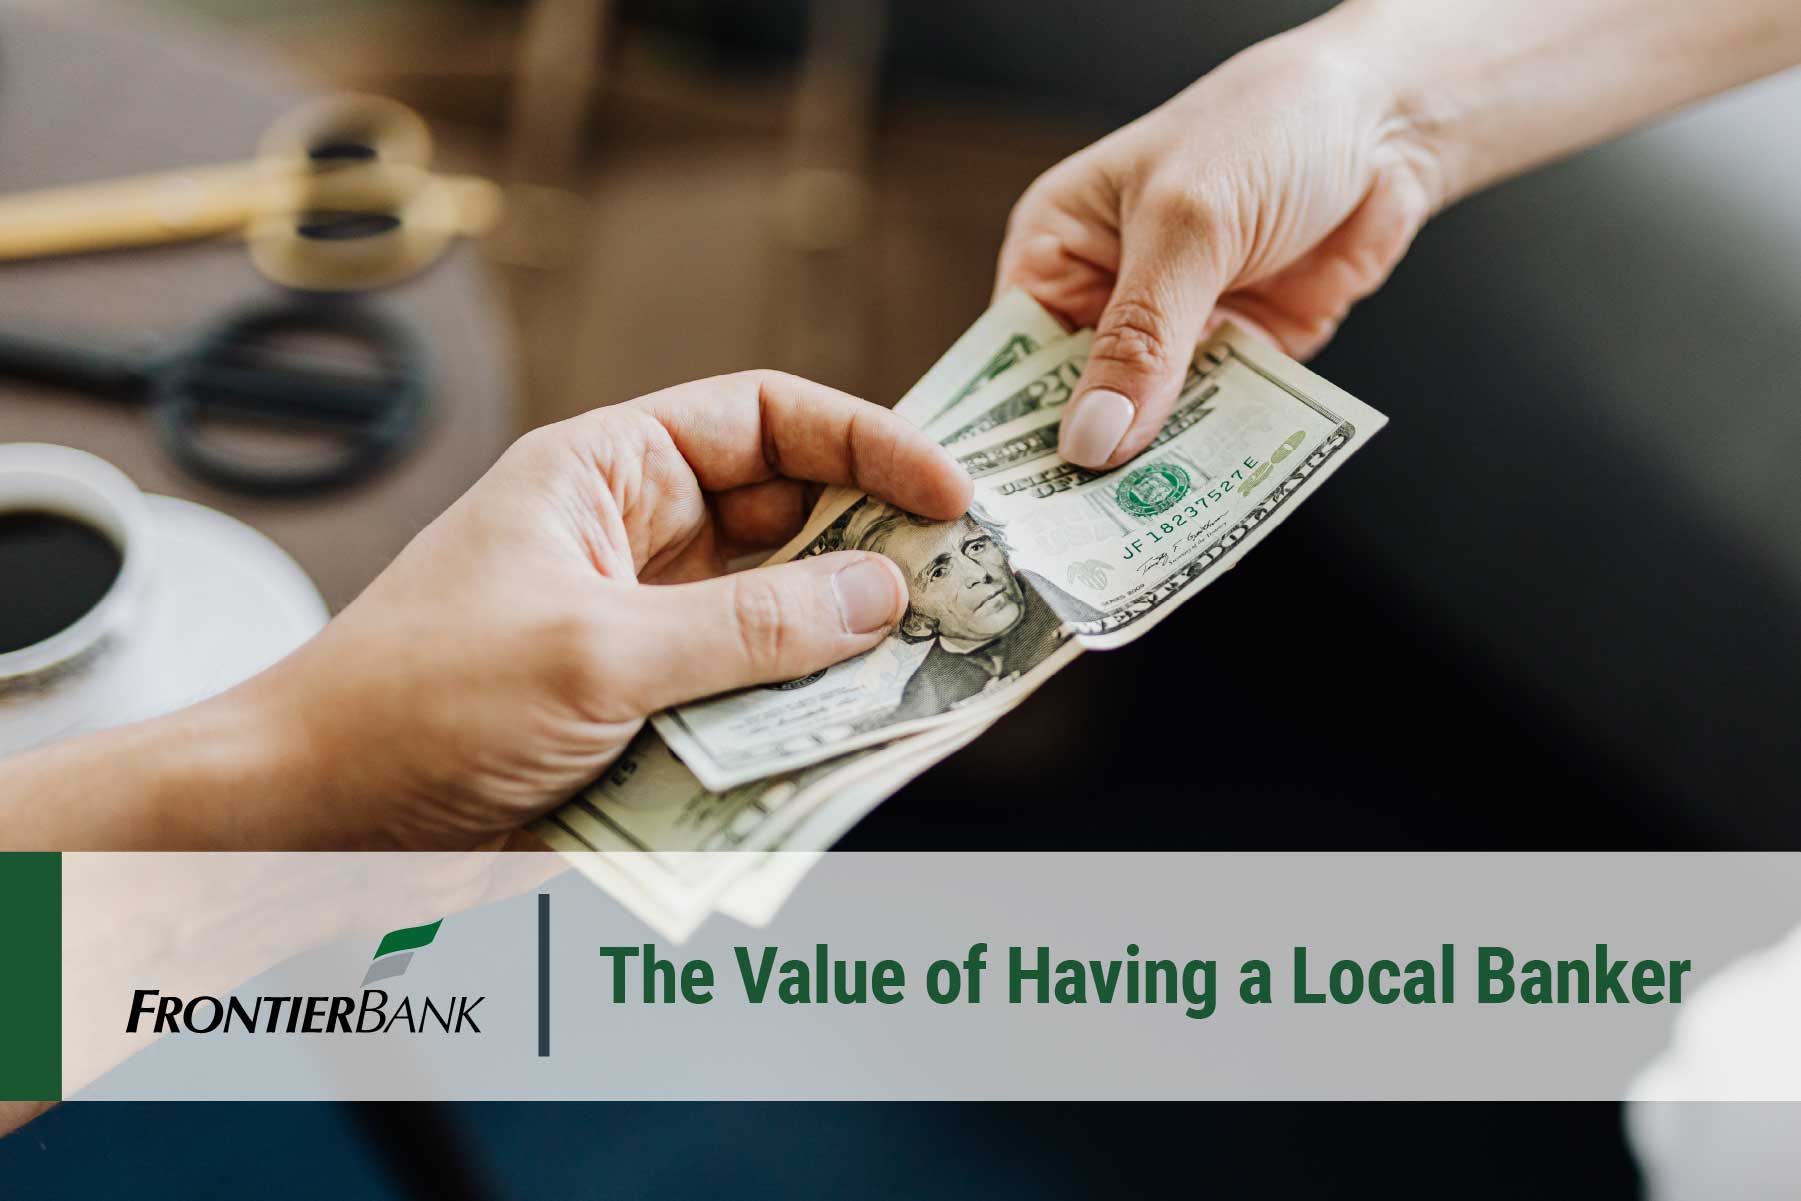 The Value of Having a Local Banker